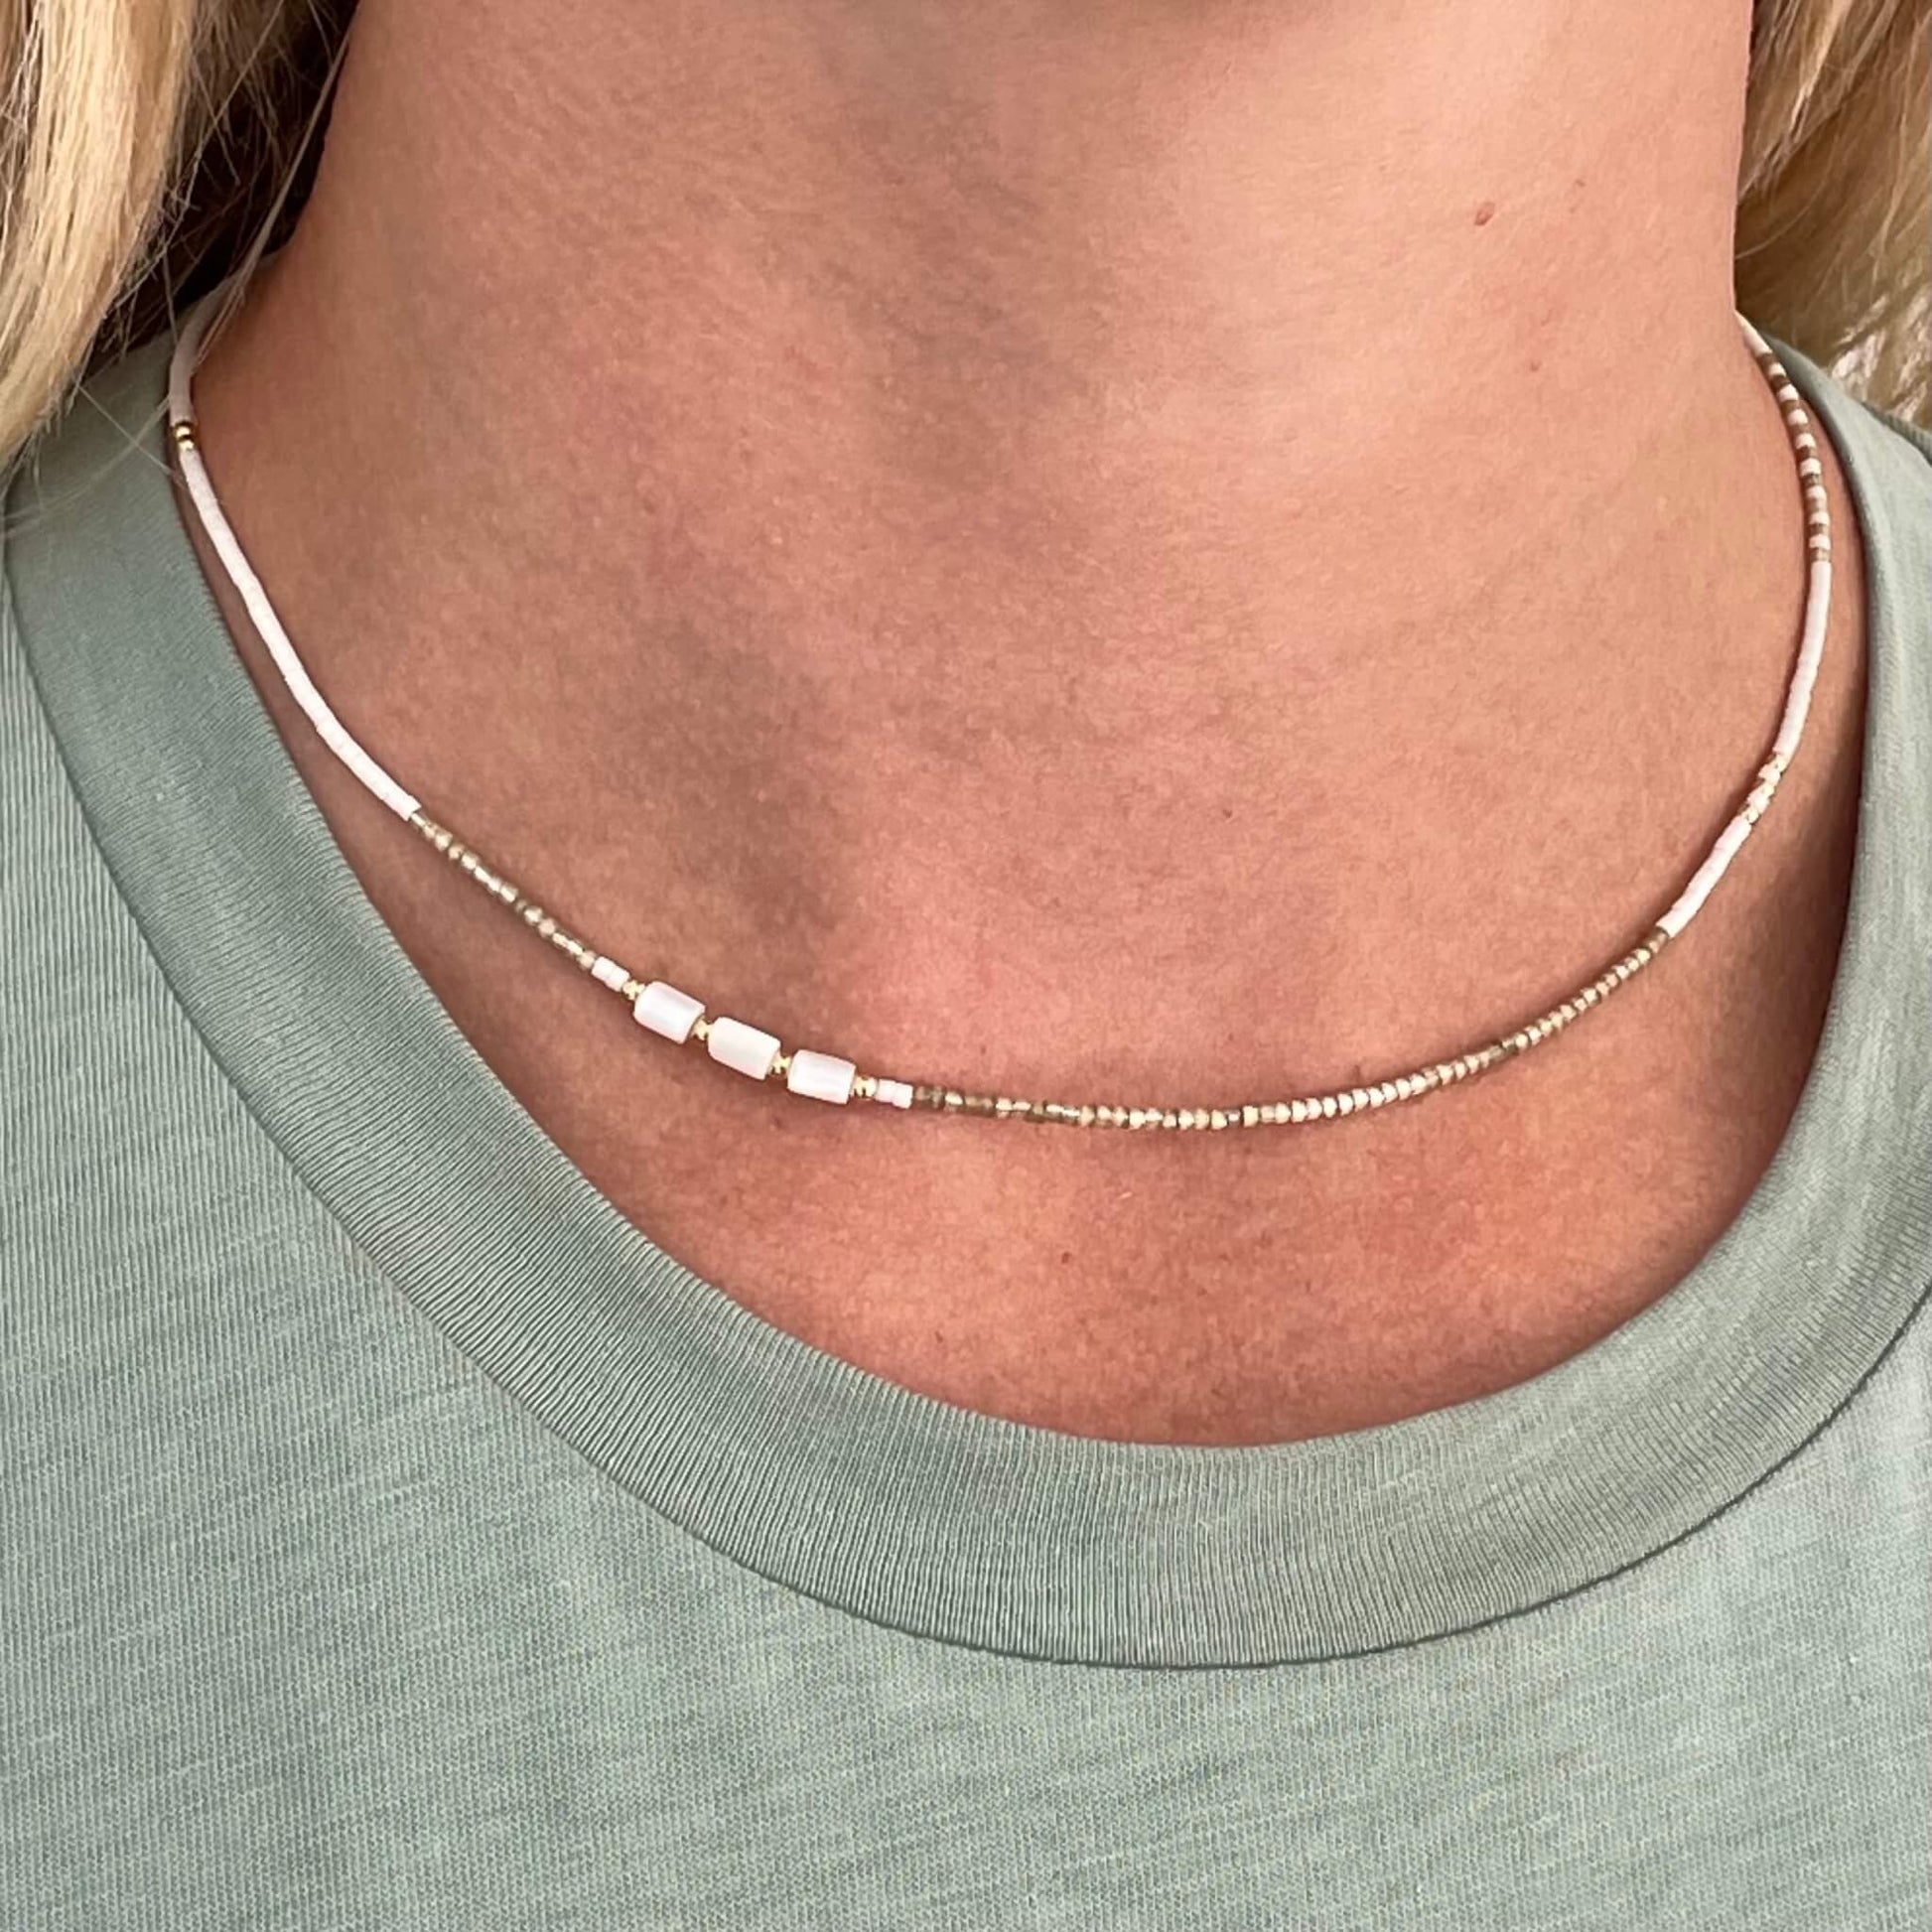 asymmetrical beaded beige white gold and other of pearl necklace shown on a neck